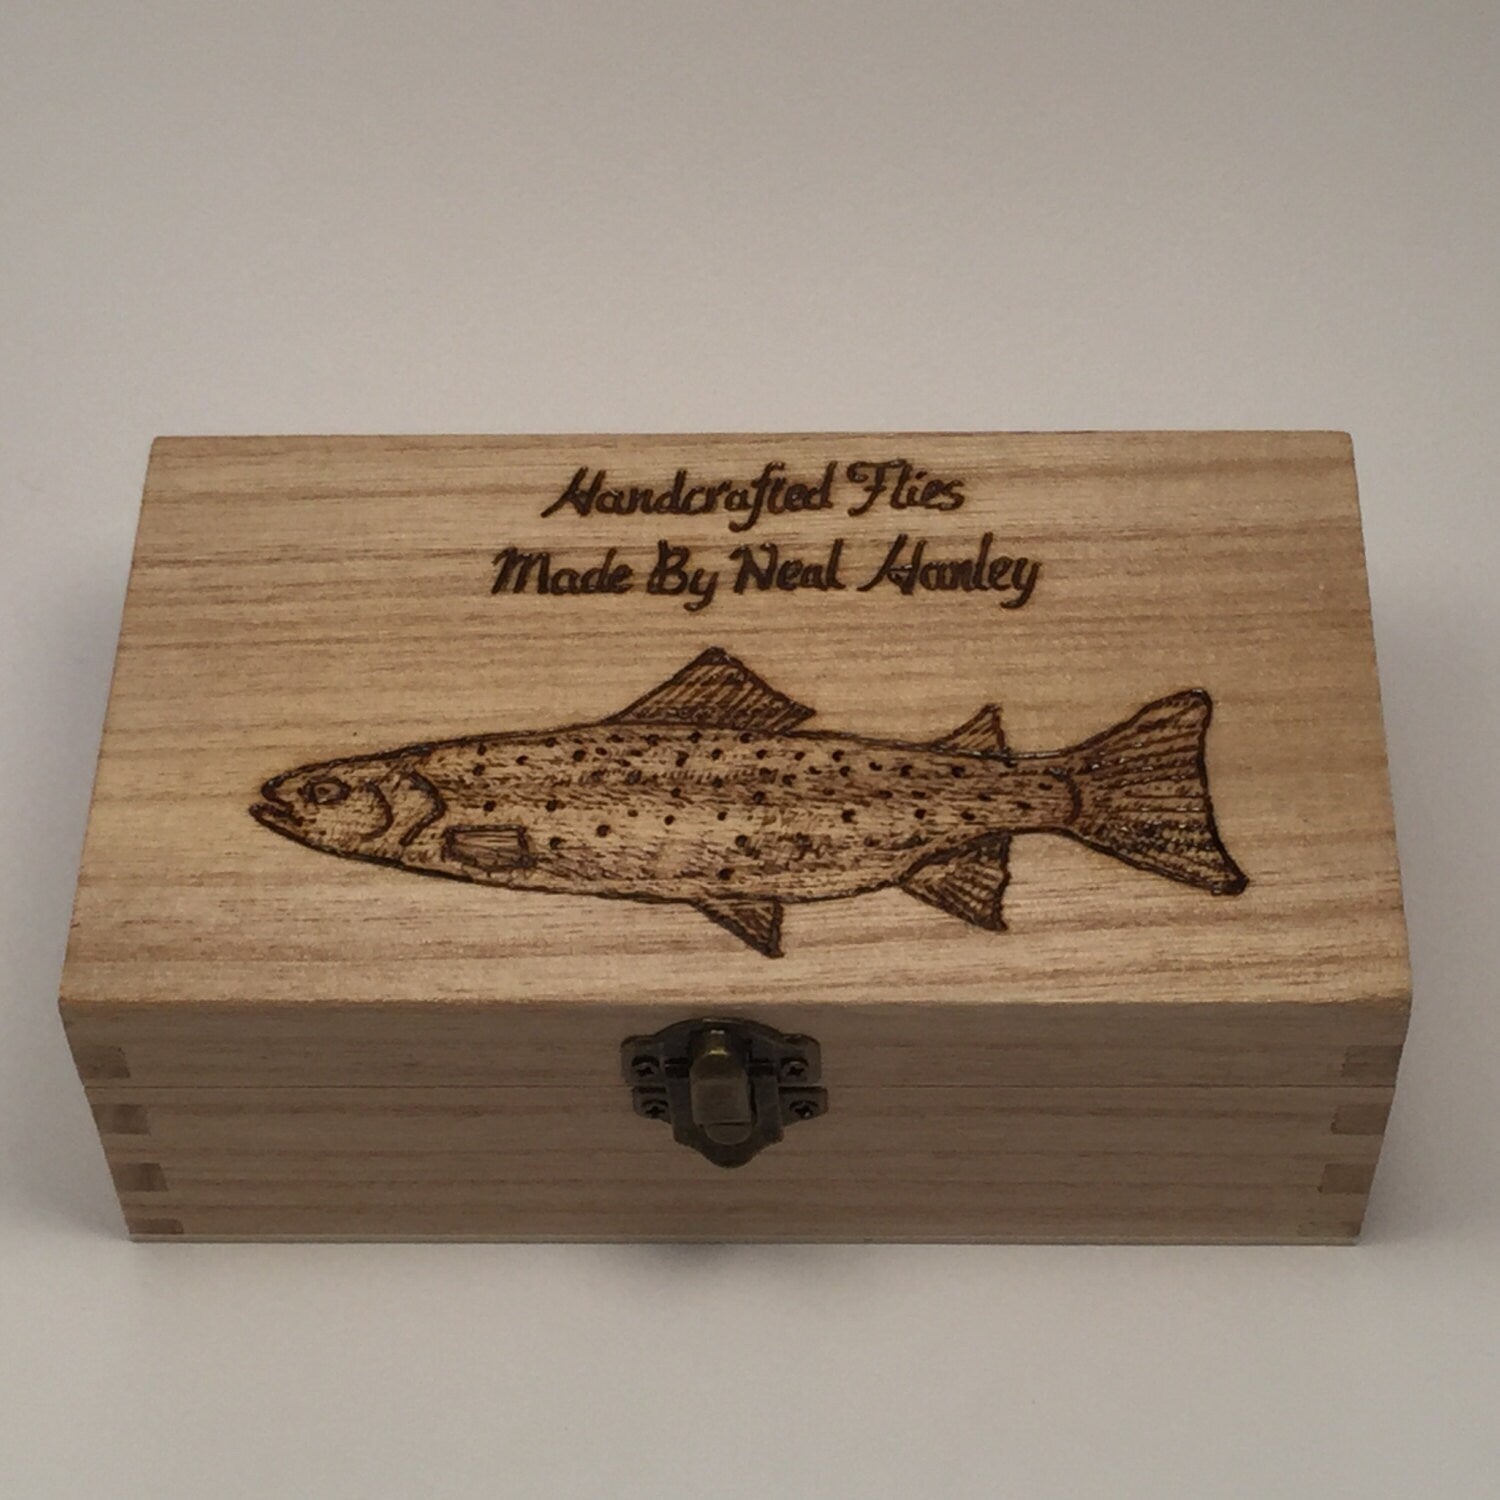 Treasure baits in a handcrafted wooden lure box